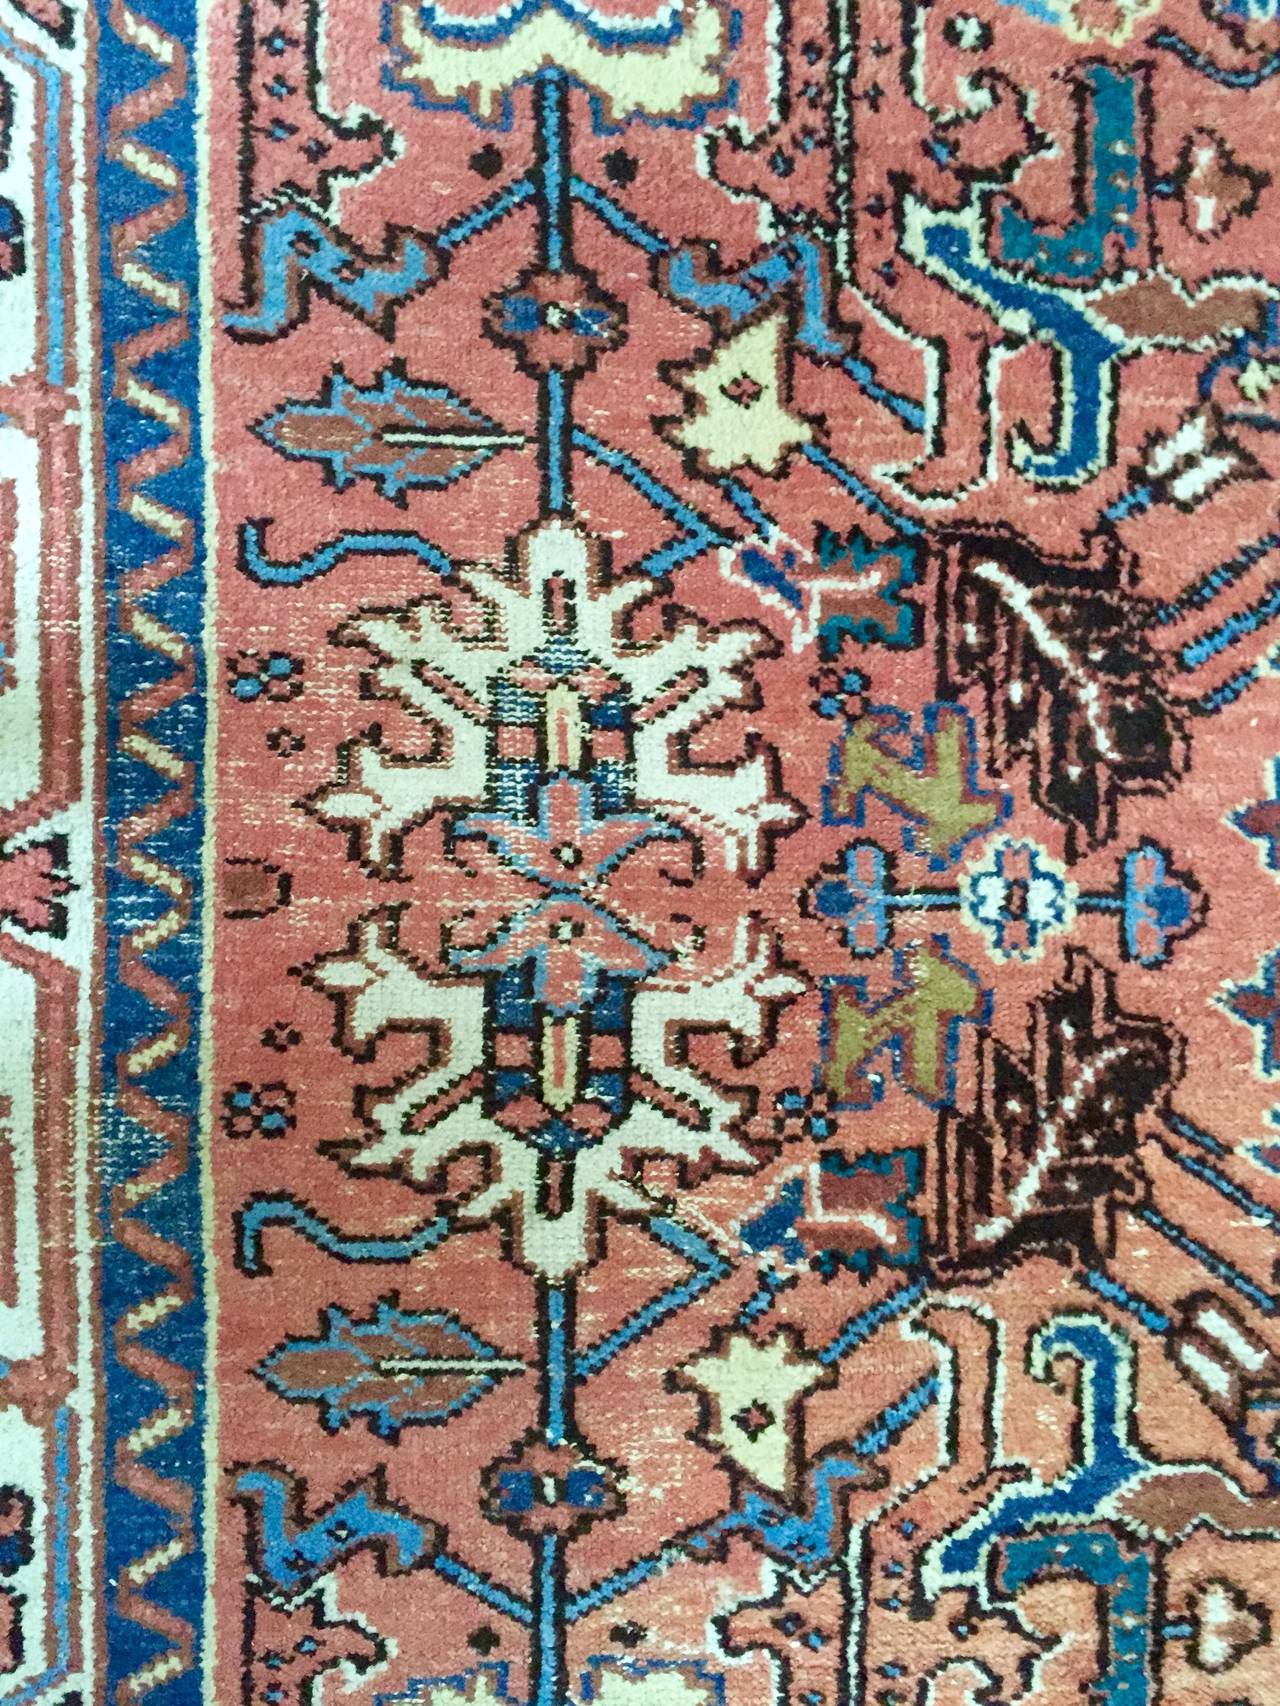 This hand knotted Persian carpet dates to the mid 1920-1930s and was made in colors that would appeal to the European market. It was quite popular among the high classes in Sweden, Portugal and Germany to commission Persian carpets in colors to suit